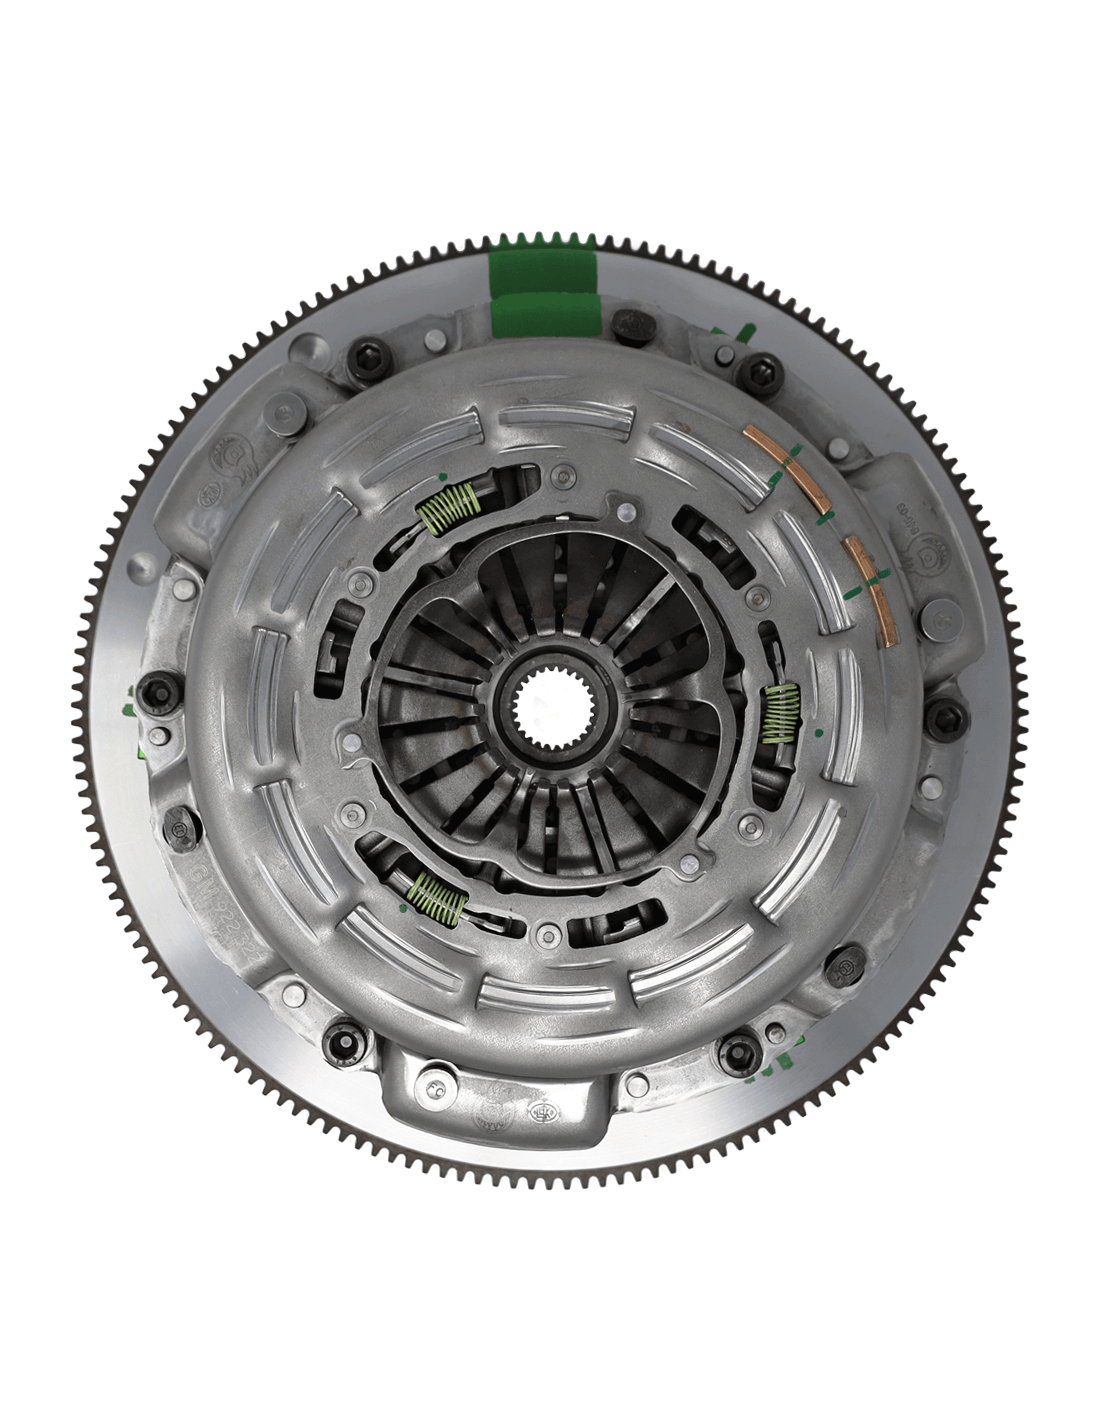 Monster Clutch Co. S Series Triple Disc Clutch (Stock-1150RWHP) for Gen 5 (2010-2015) Chevrolet Camaro SS